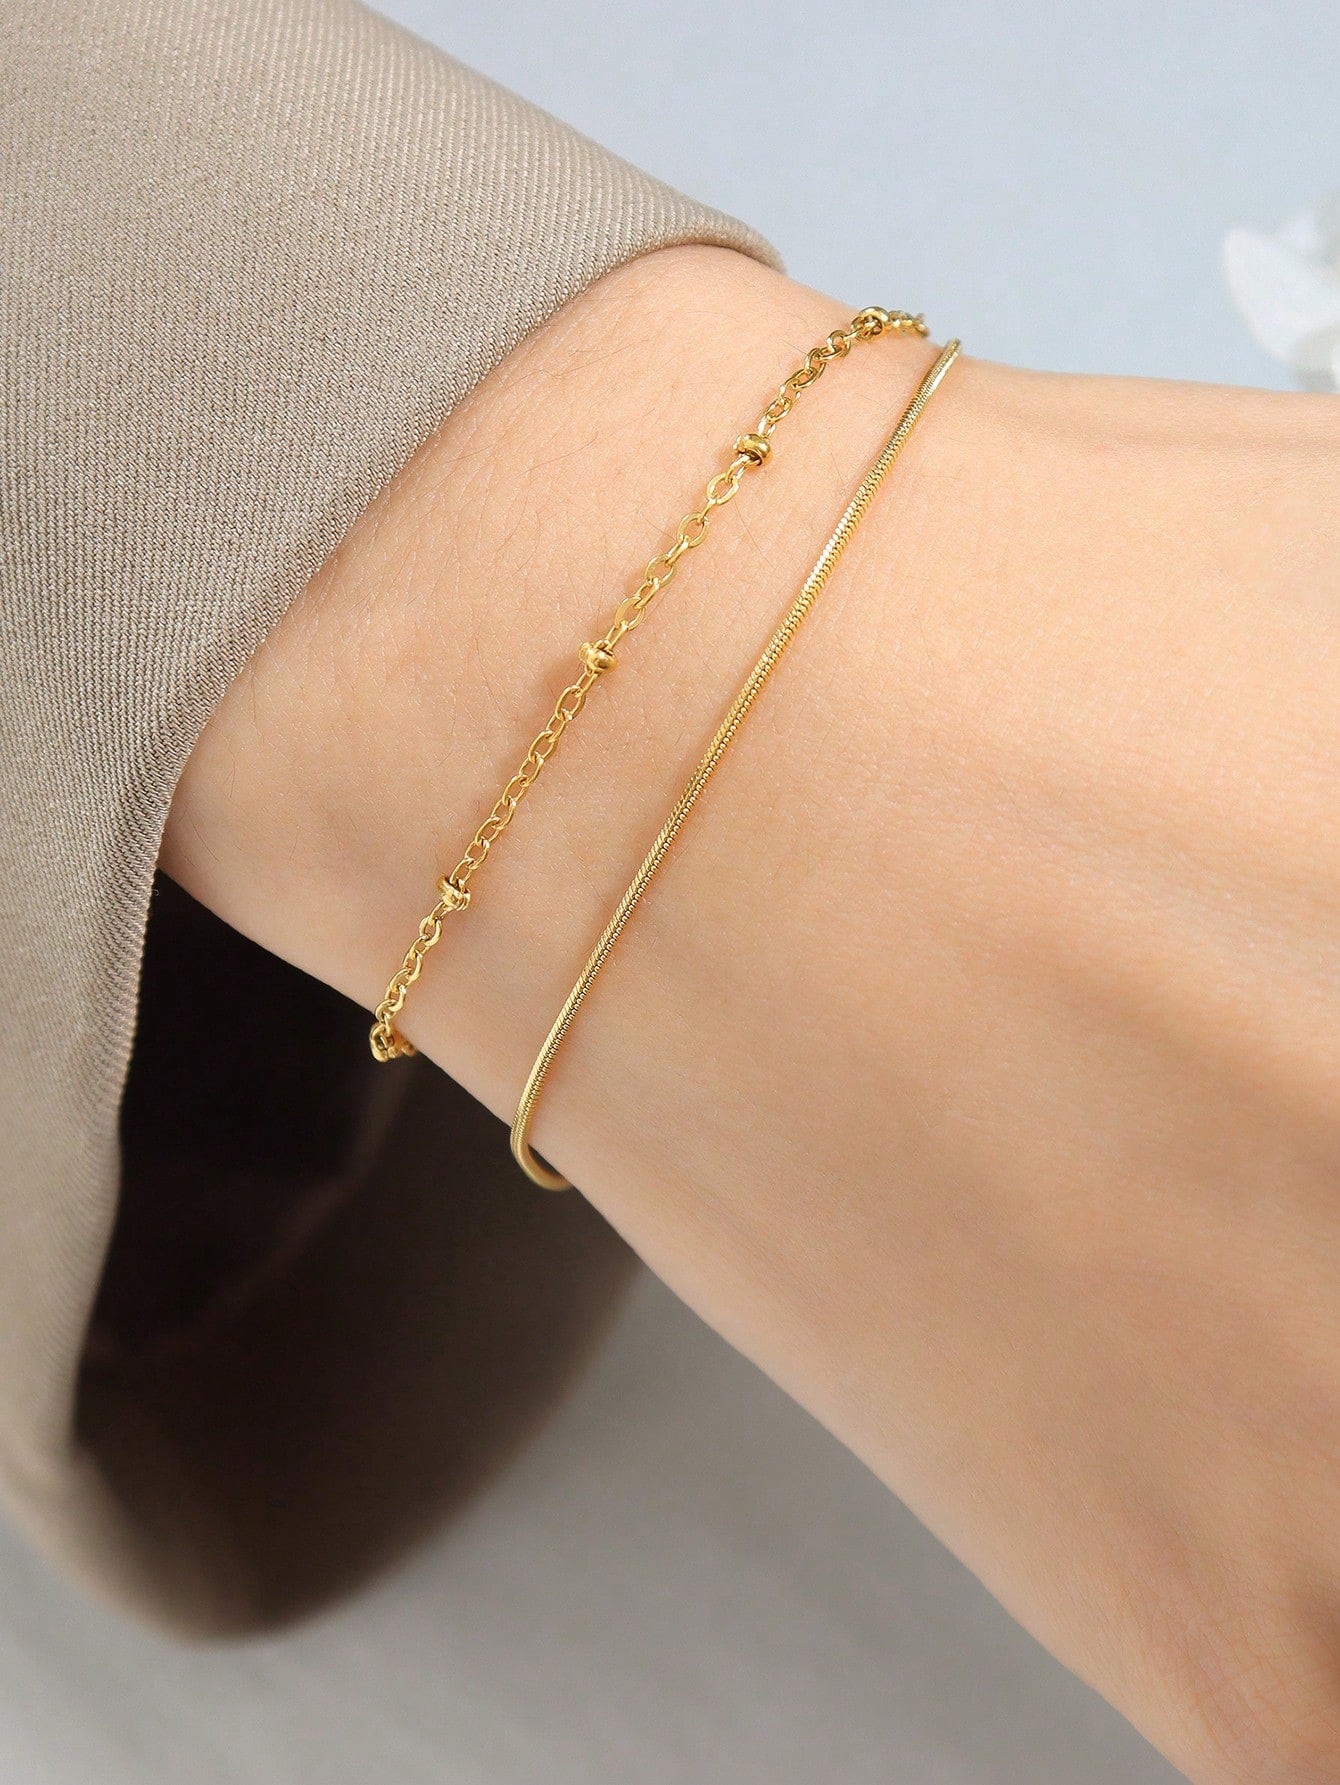 1pc Korean Style Minimalist Chic Double Layered Stainless Steel Chain Bracelet For Women